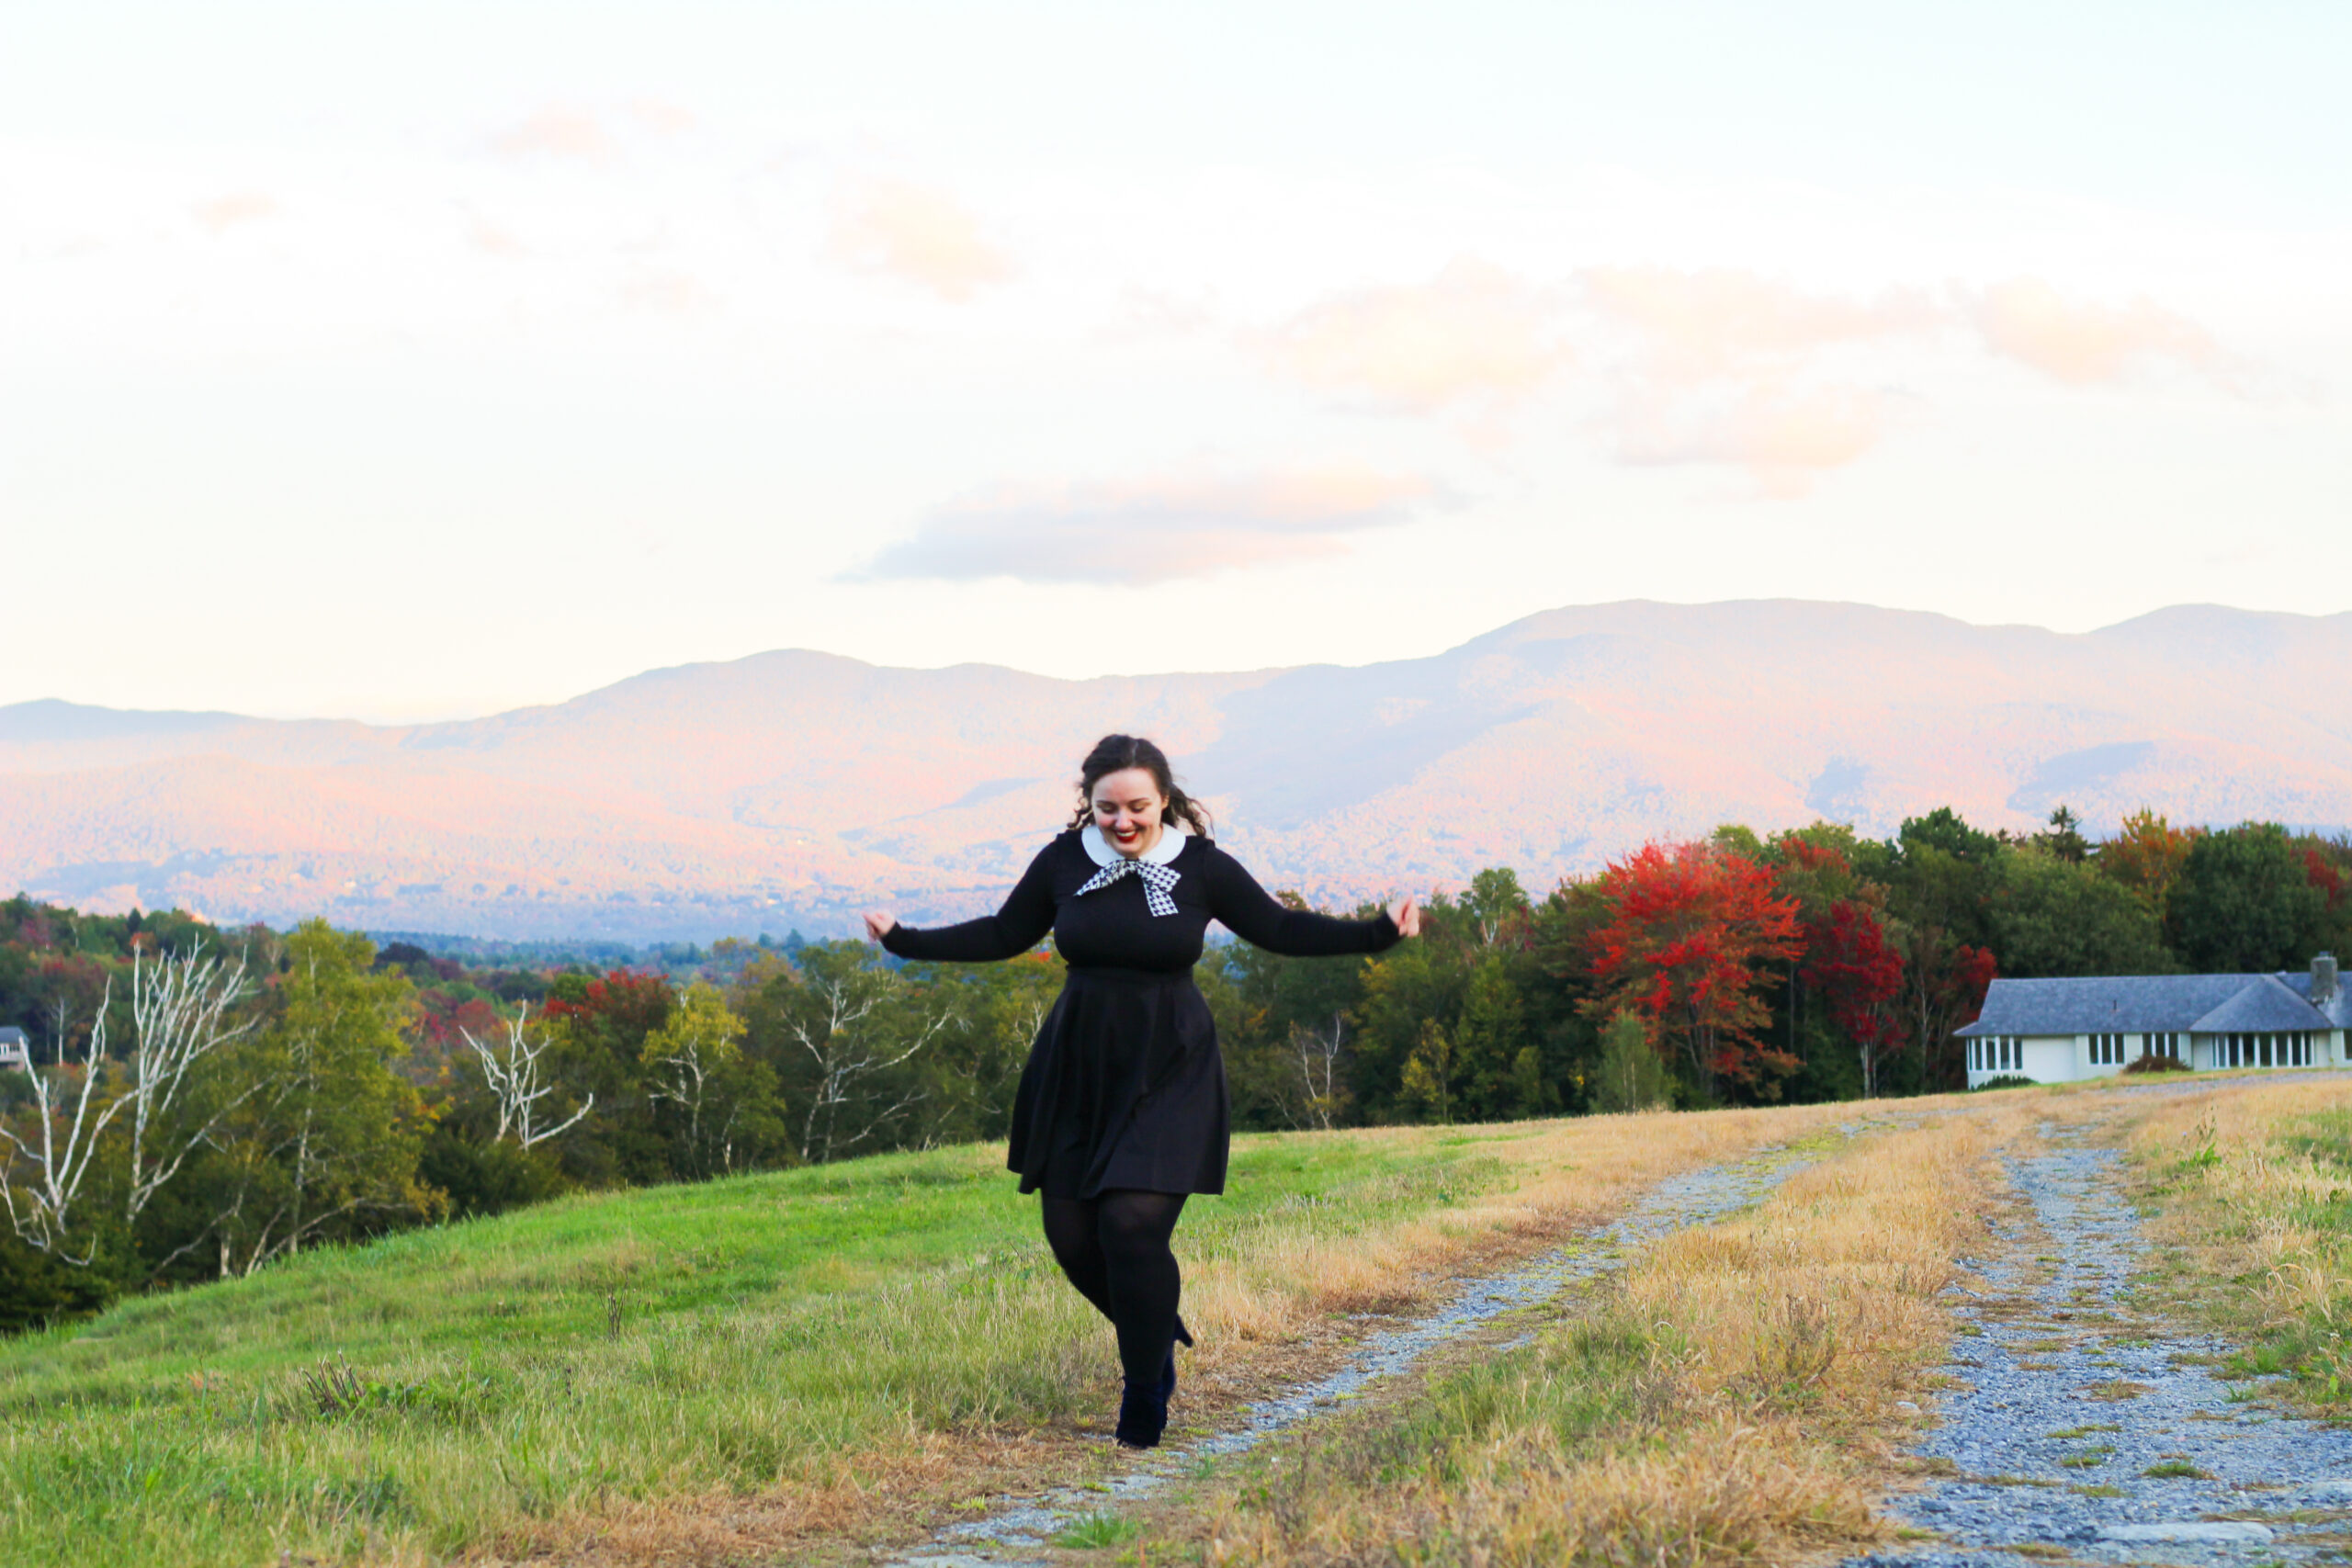 A photo of Joanna No Banana, who is the writer of this blog post, a white woman with brown, curly hair wearing a dark blue dress and black leggings running in a field with mountains in the background